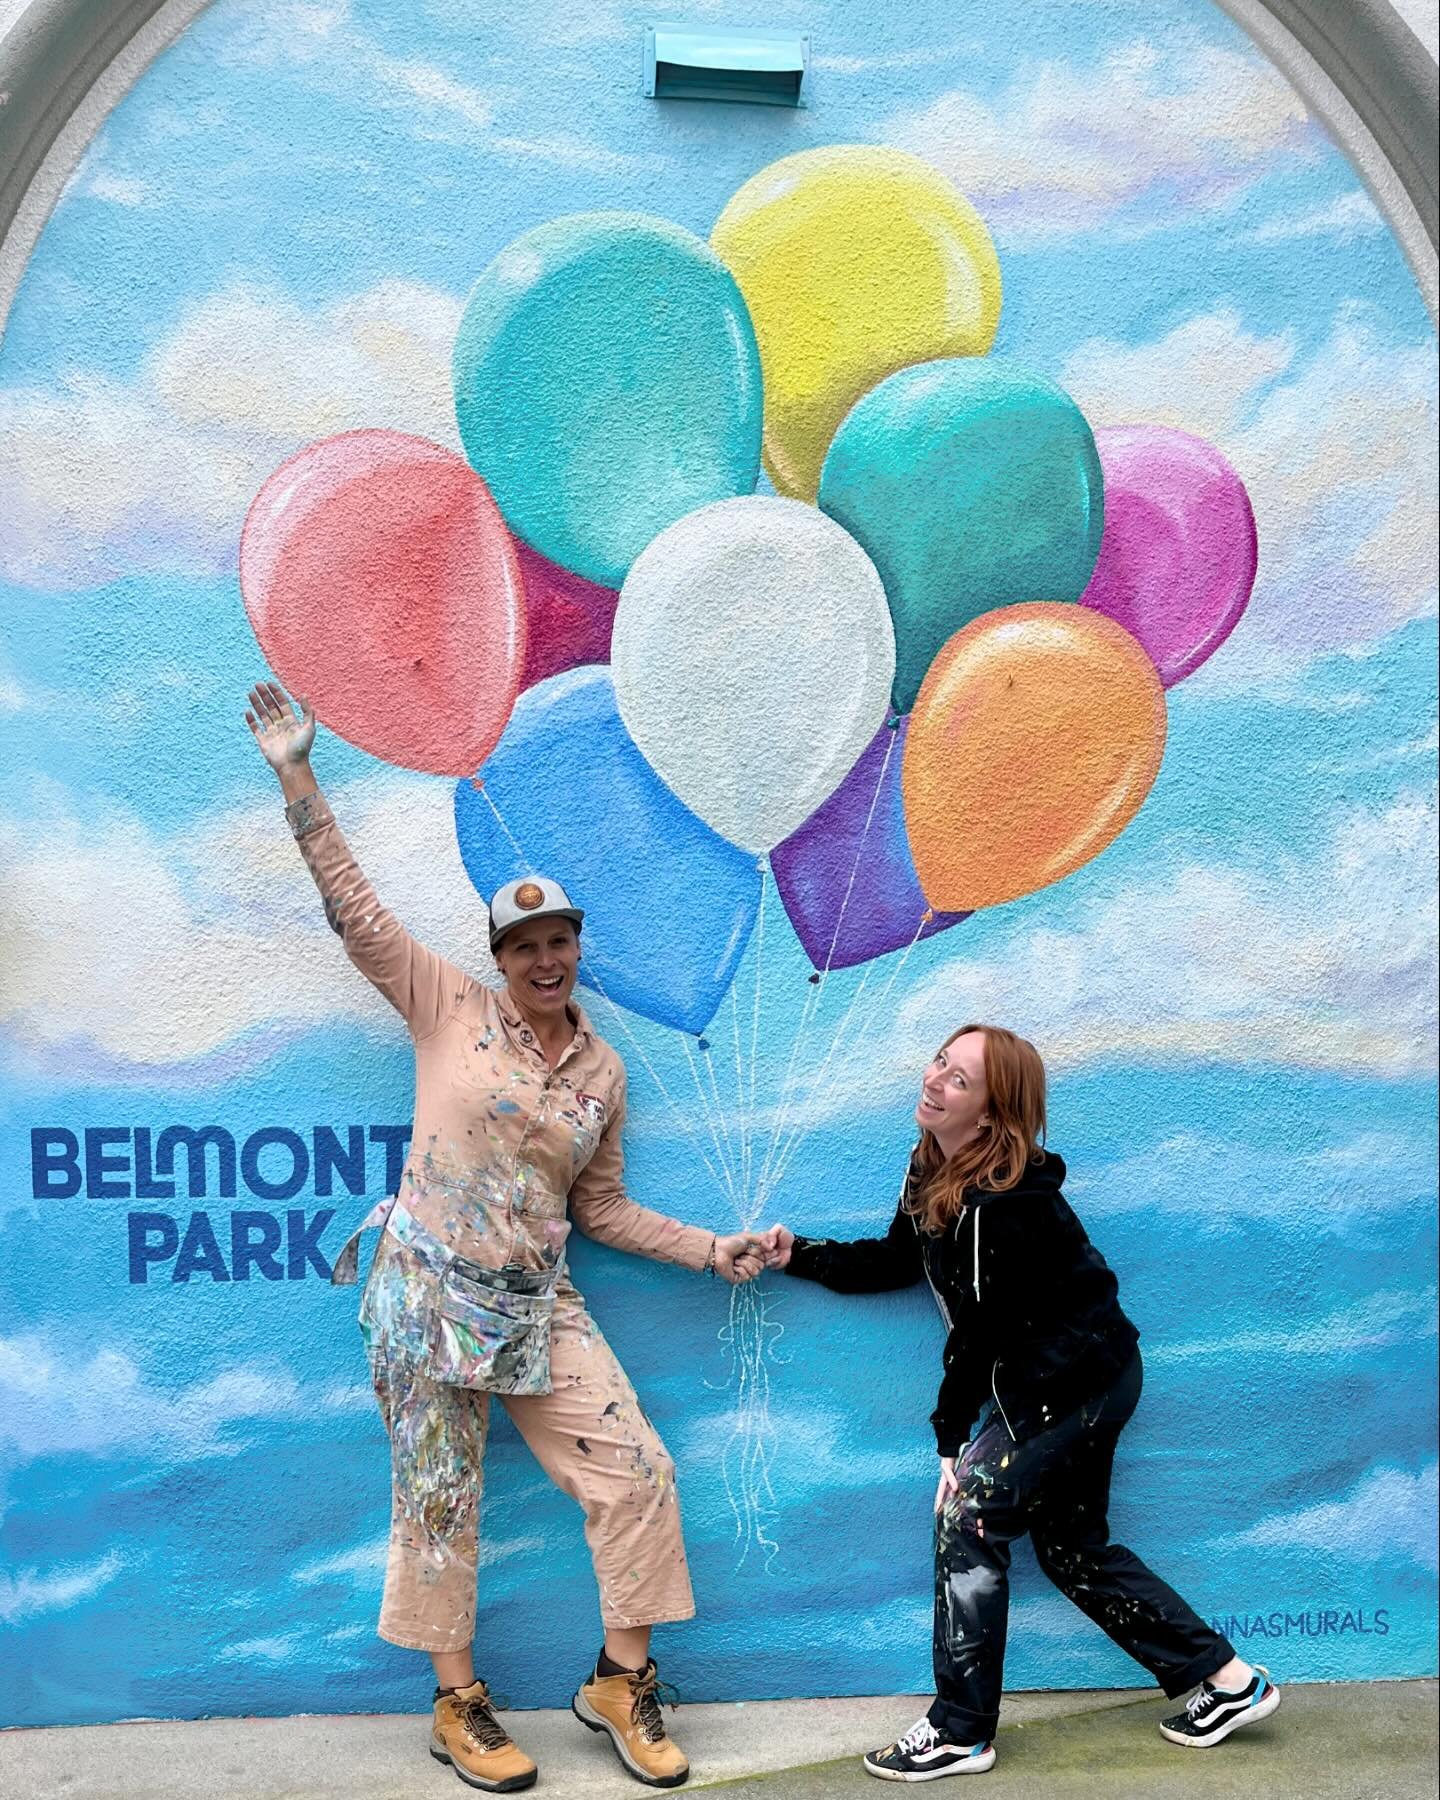 I painted 2 big murals at Belmont Park this week for their Belmont in Bloom Festival. I had, count &lsquo;em, 4 awesome helpers along the way. 
We listened to lots of censored pop hits, heard hours of gleeful screams from the rides, and I even saw a 